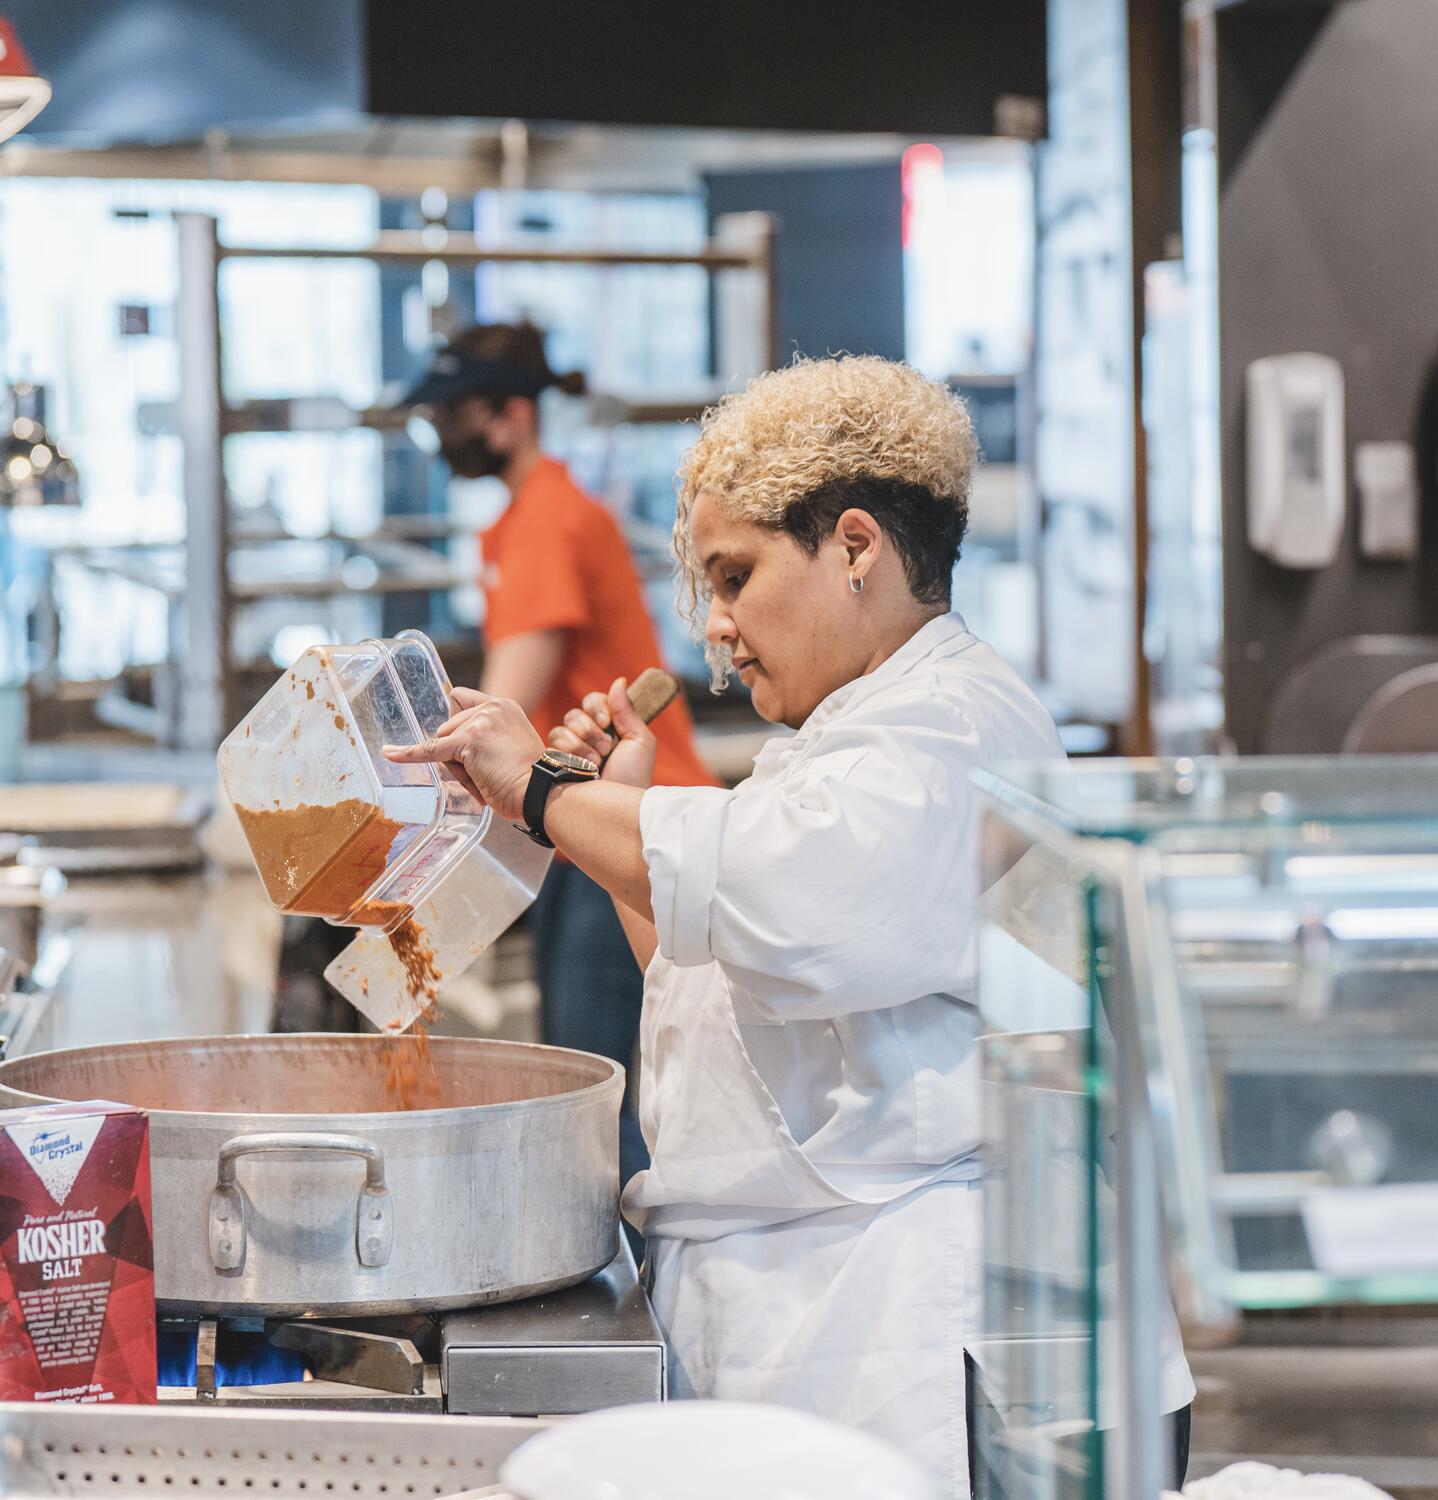 Chef Crystol Smith prepares food in University Housing dining halls.